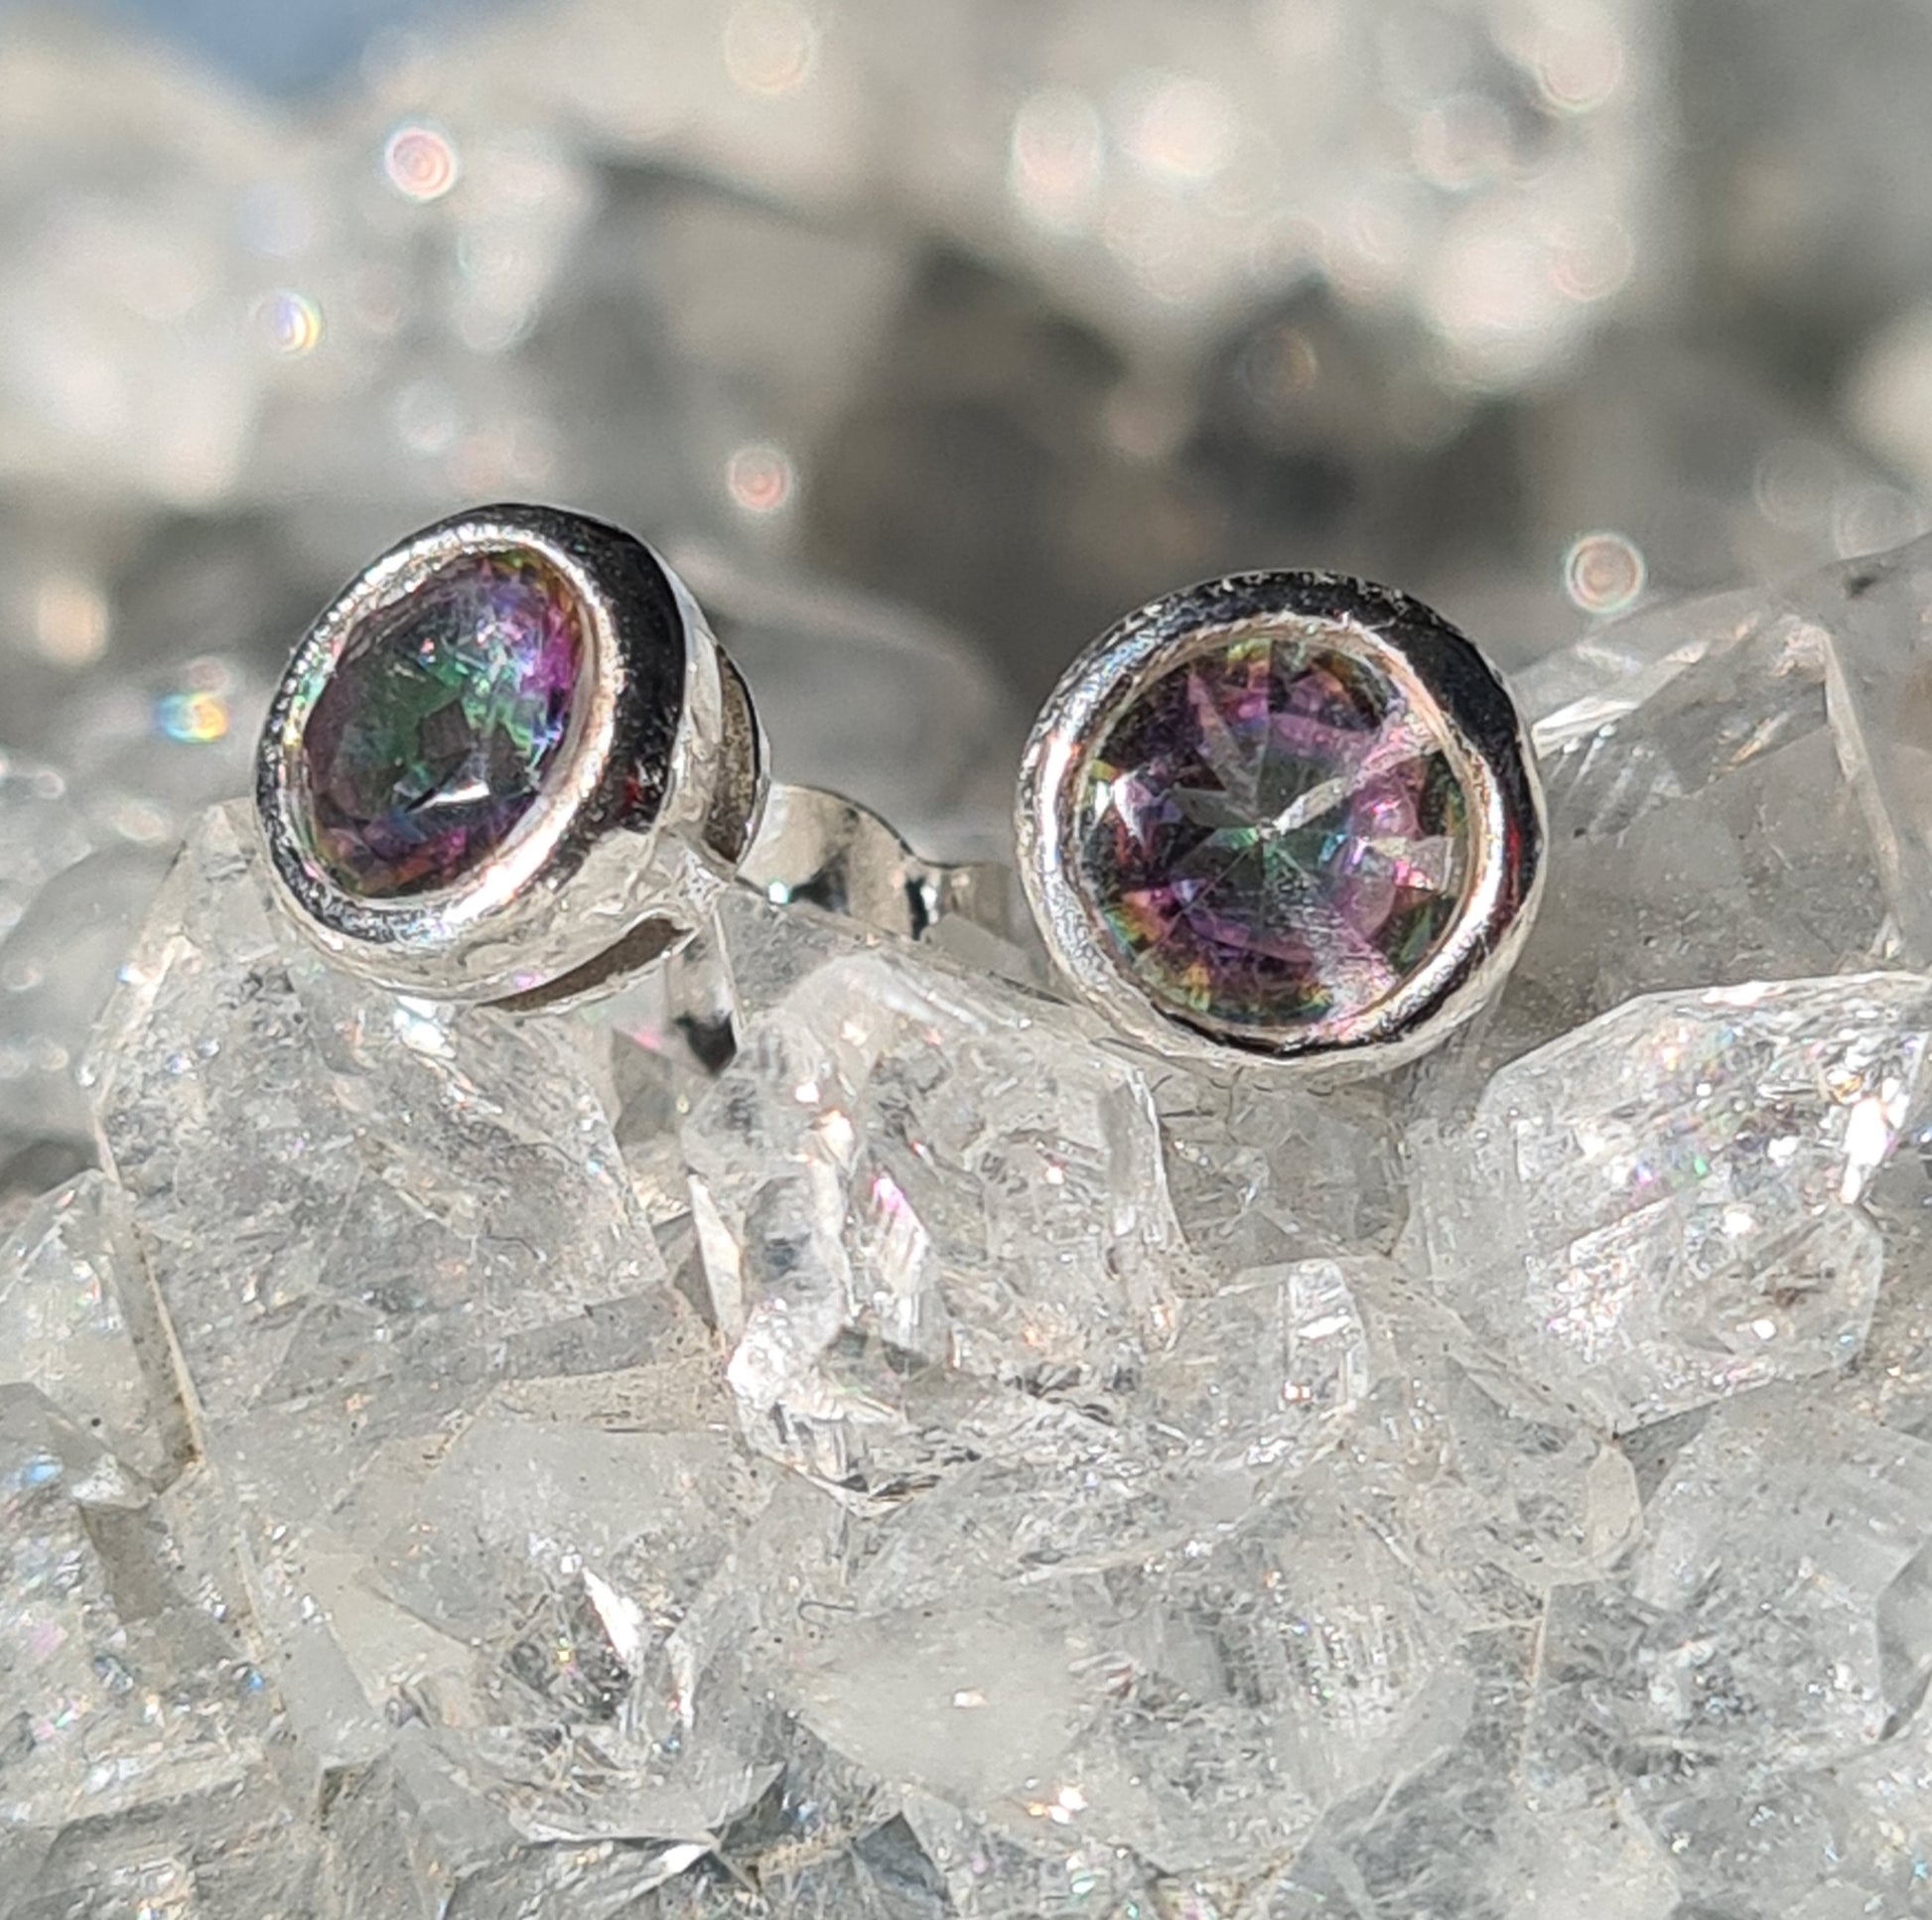 A pair of faceted mystic topaz set stud earrings in sterling silver. Shown on crystallised background.